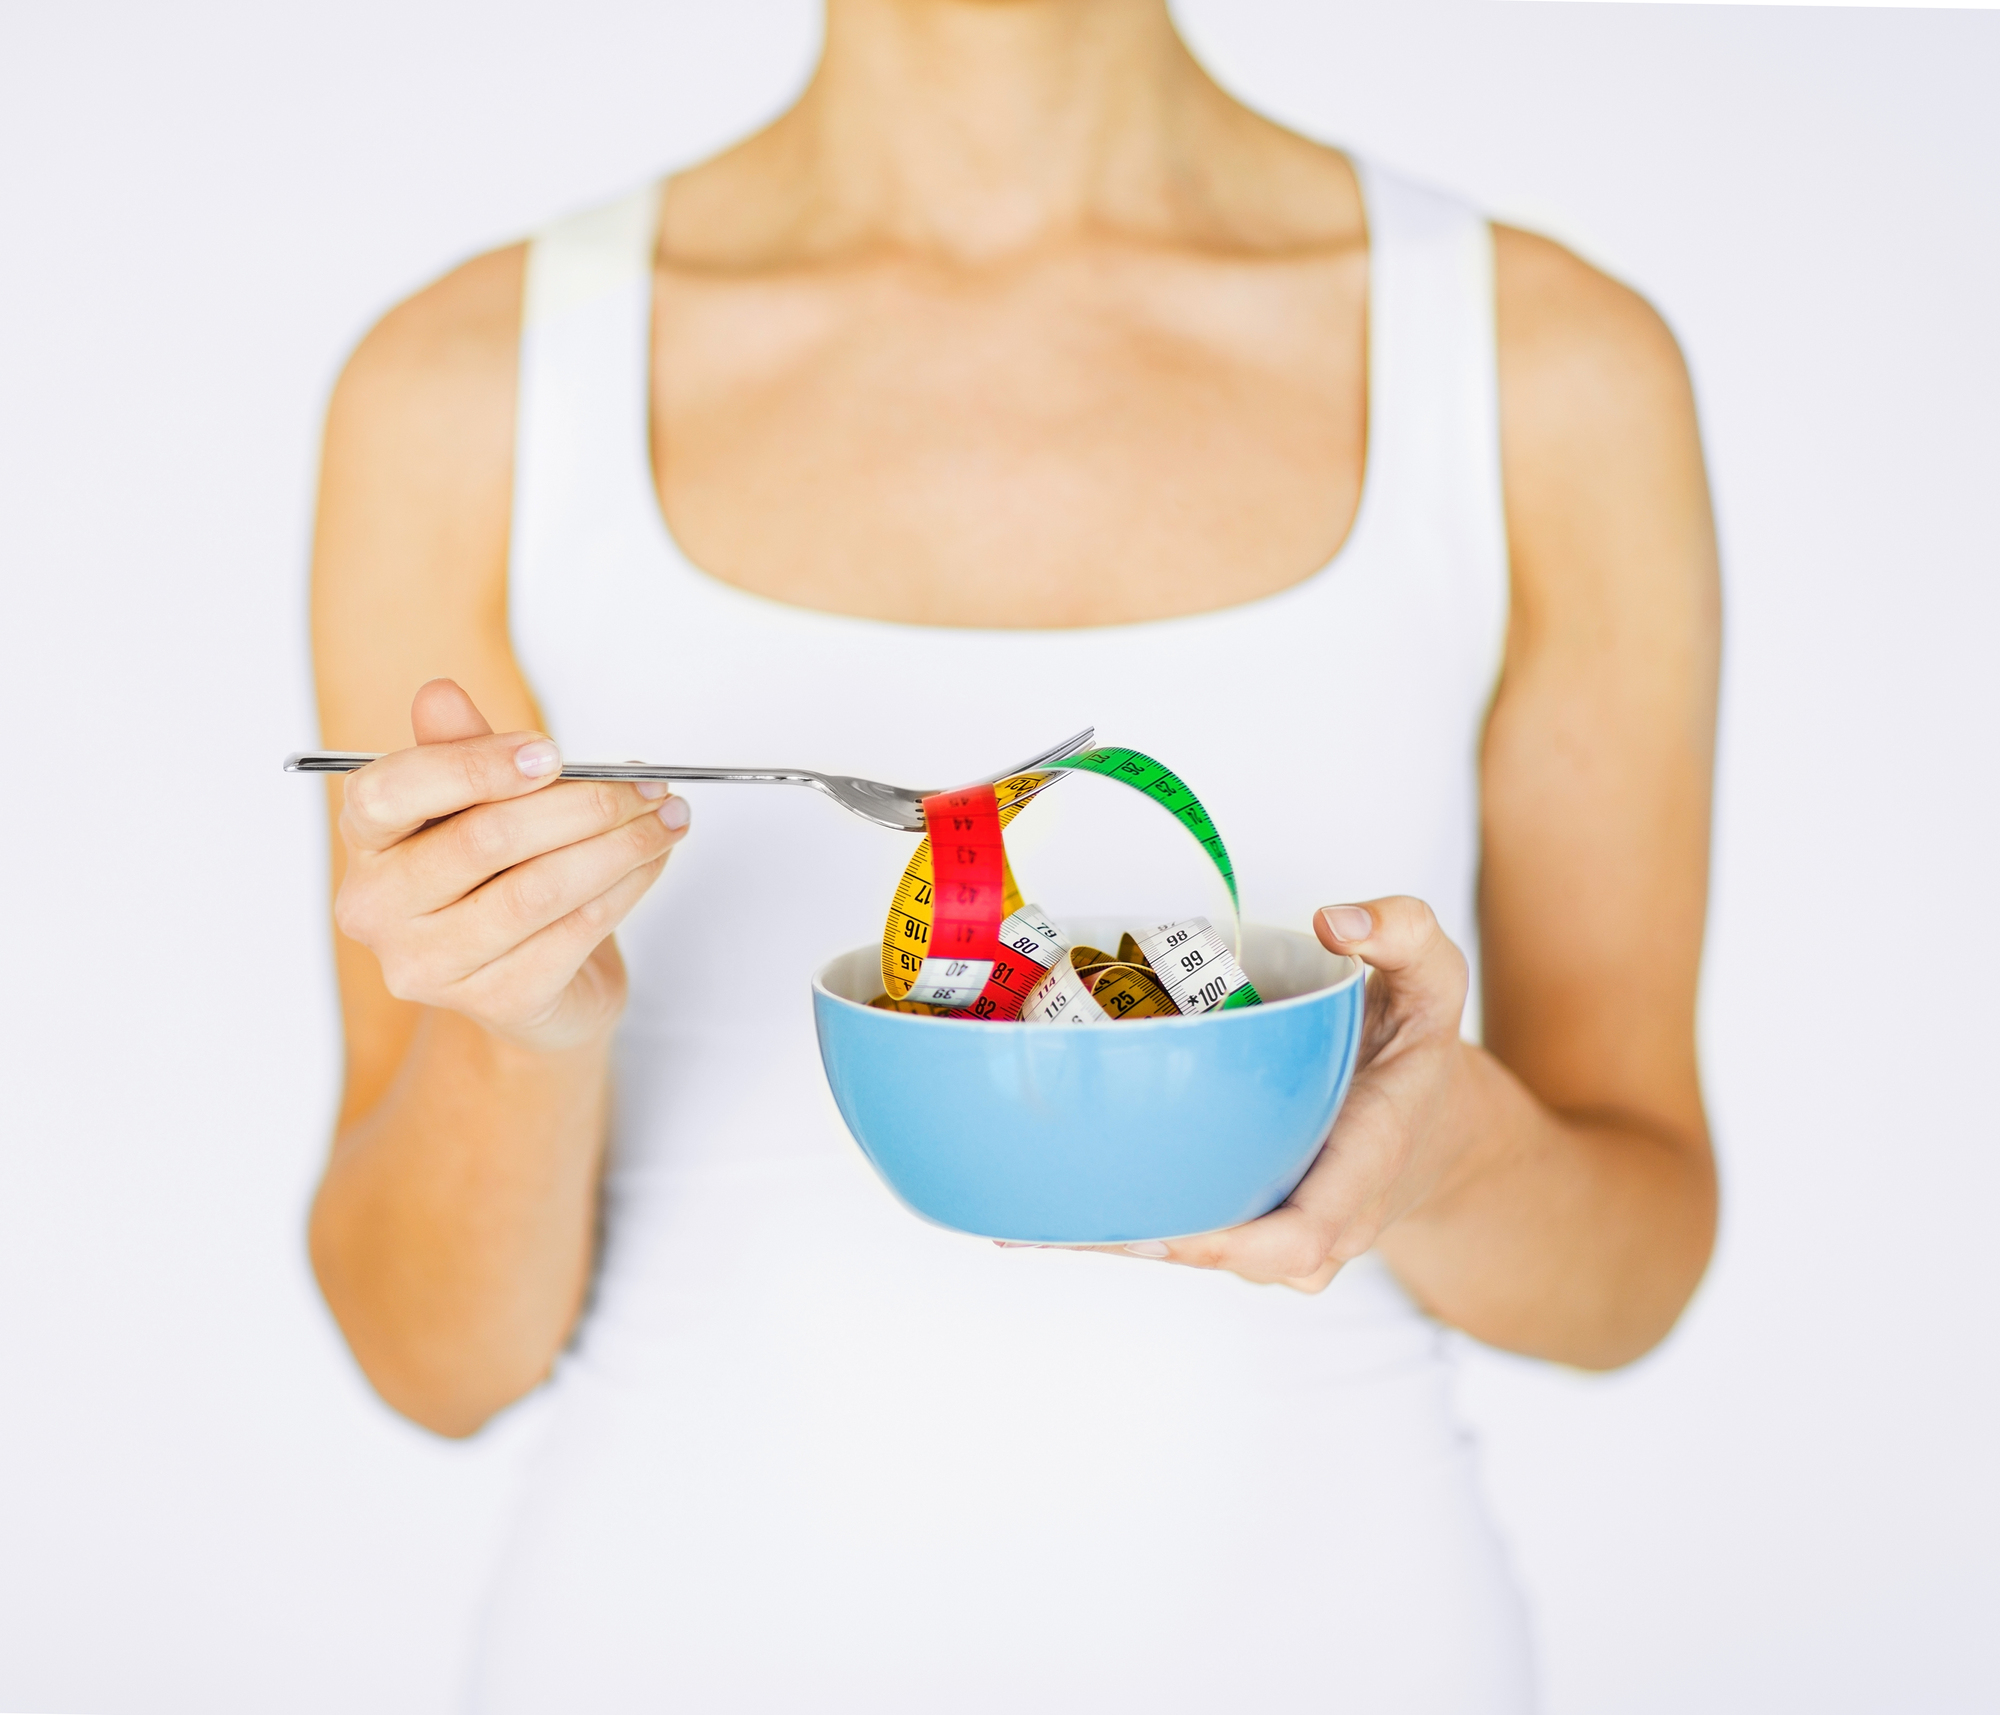 sport and diet concept - woman hands holding bowl with measuring tape